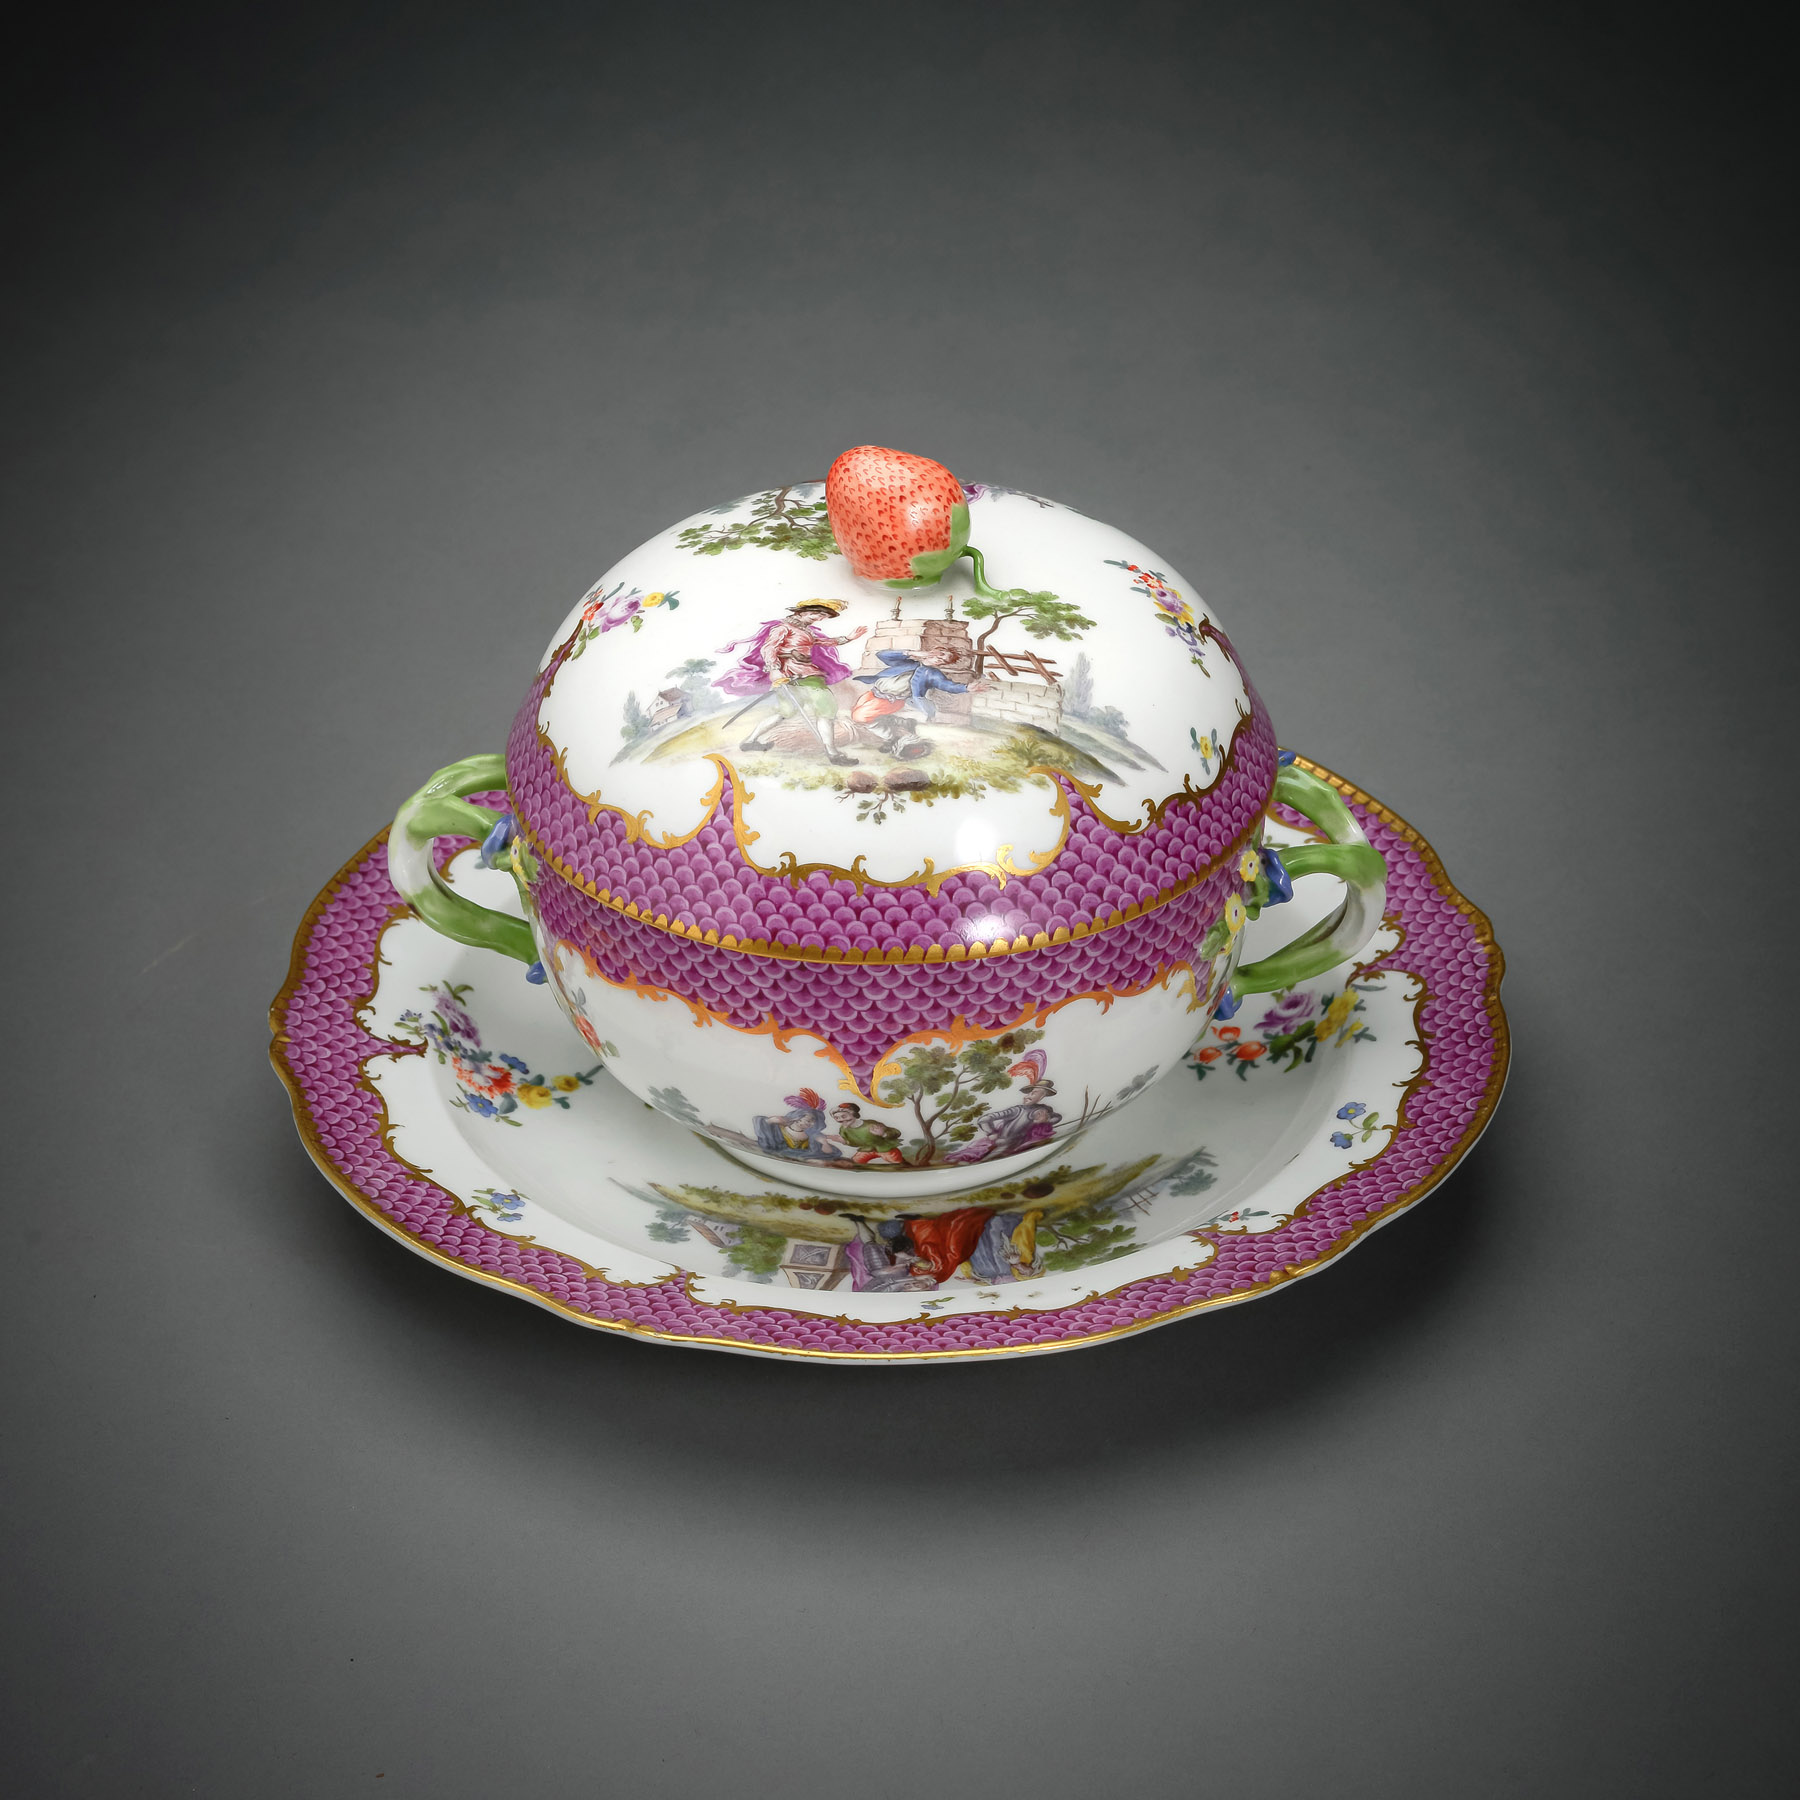 A FINE MEISSEN PORCELAIN ECUELLE WITH COVER AND DISH - Image 2 of 4